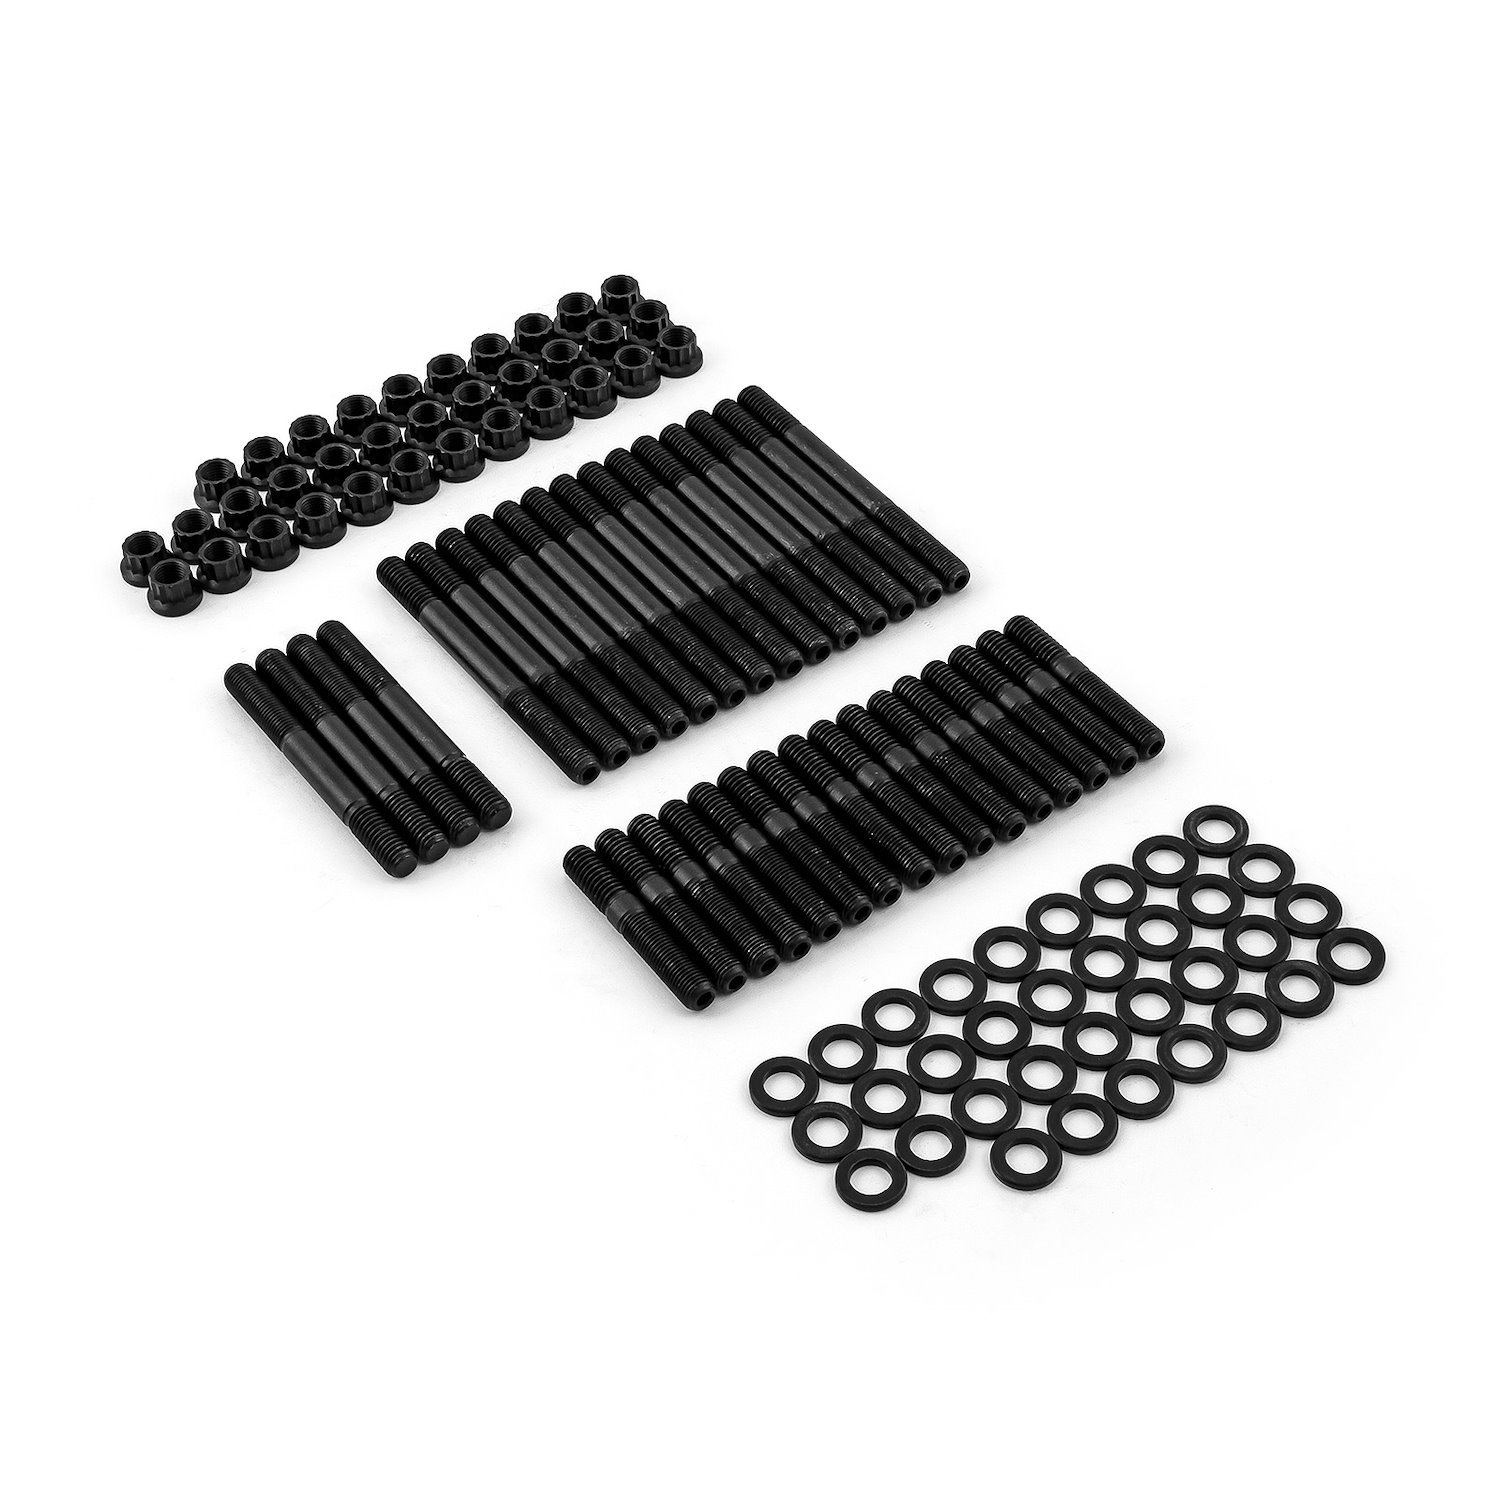 Head Stud Kit for 1955-2000 Chevy Small Block